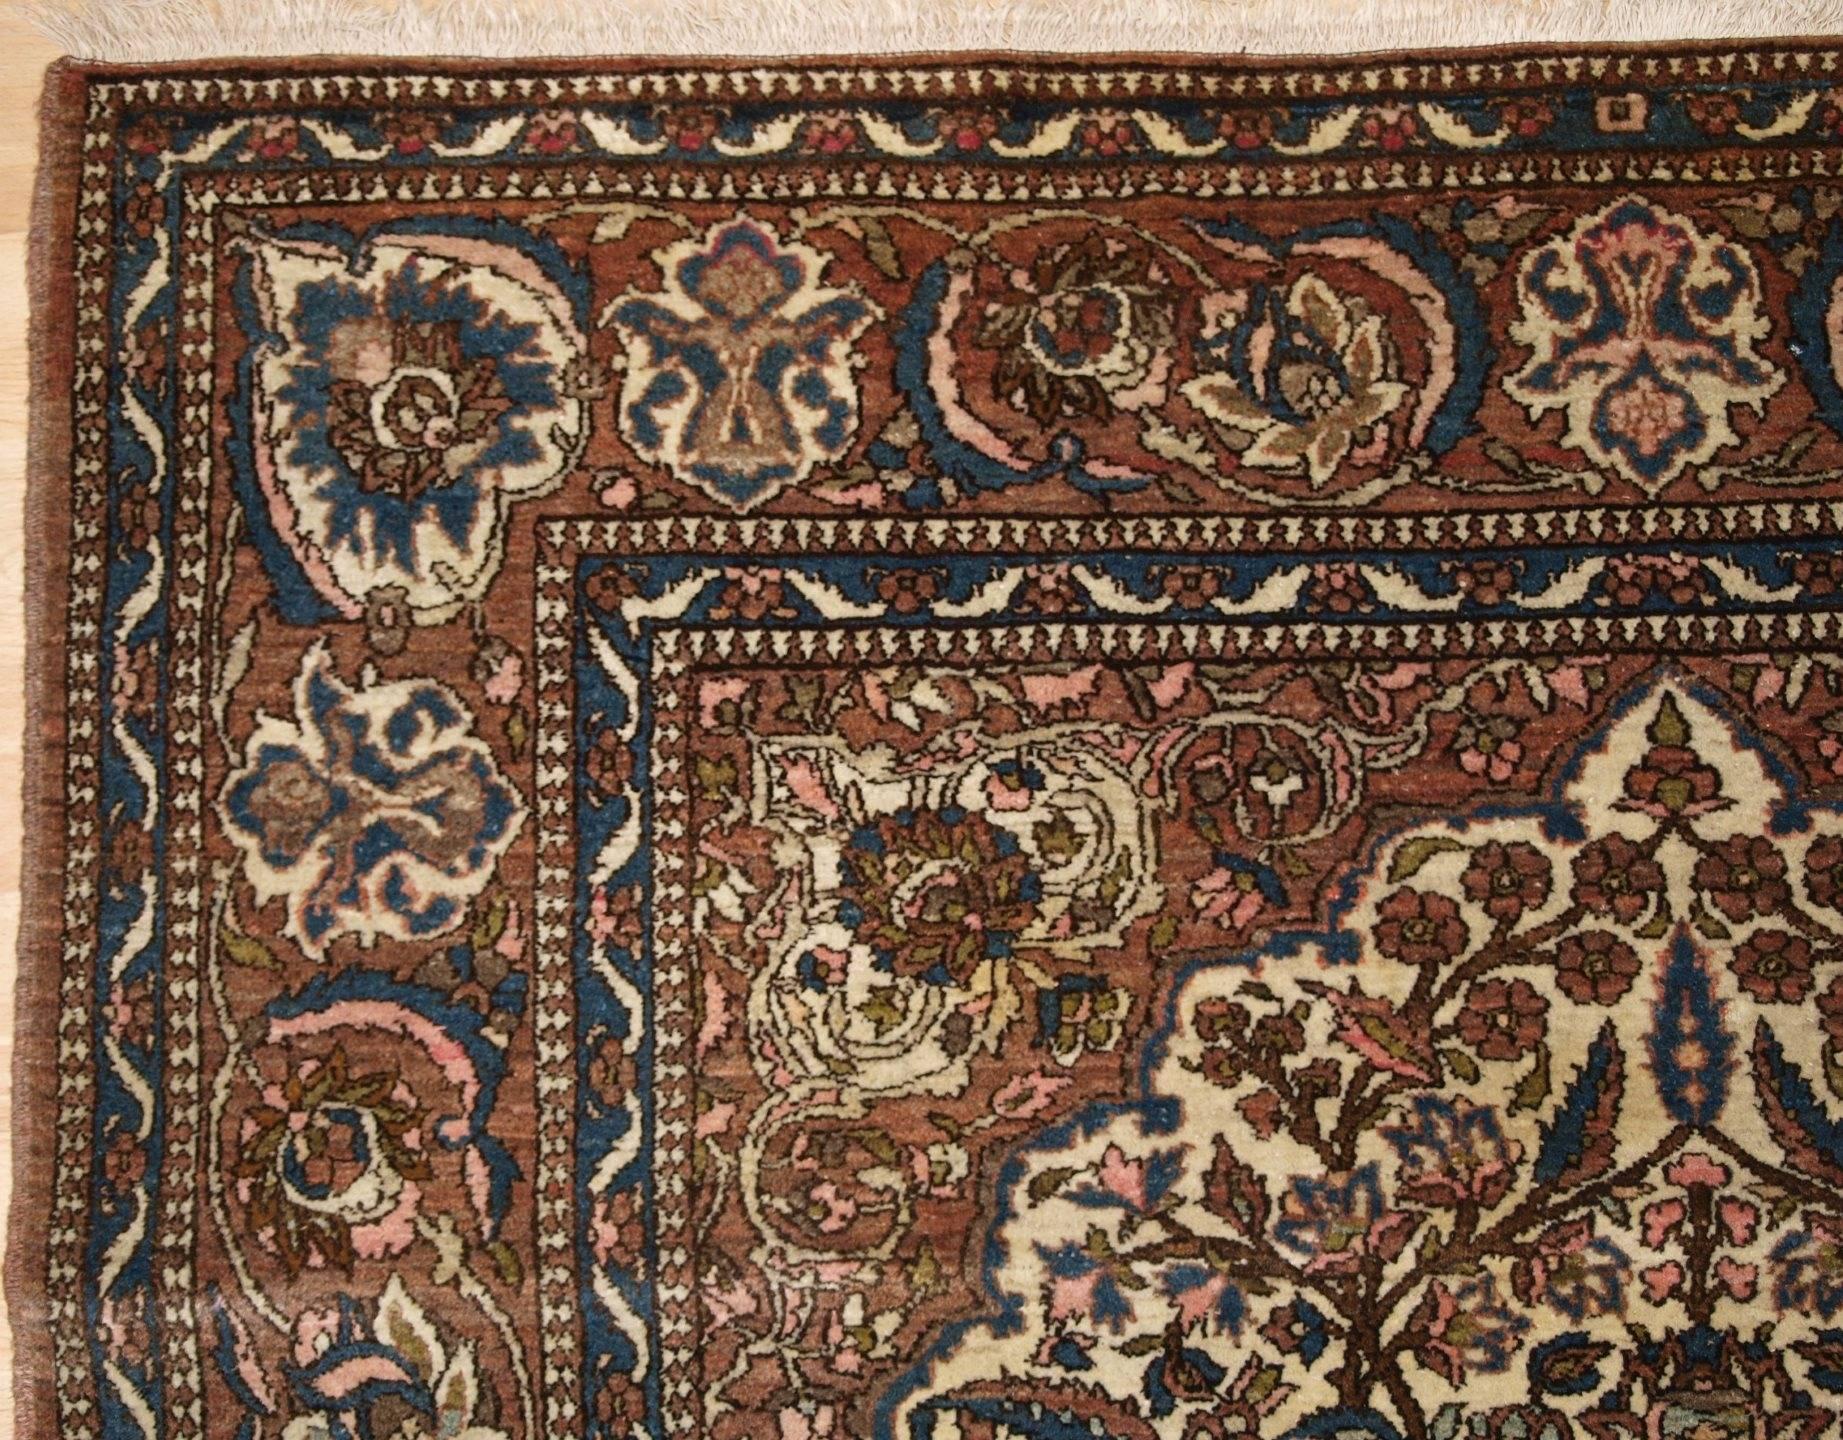 Central Asian Isfahan Prayer Rug with a Very Traditional Floral Vase Design, circa 1900 For Sale